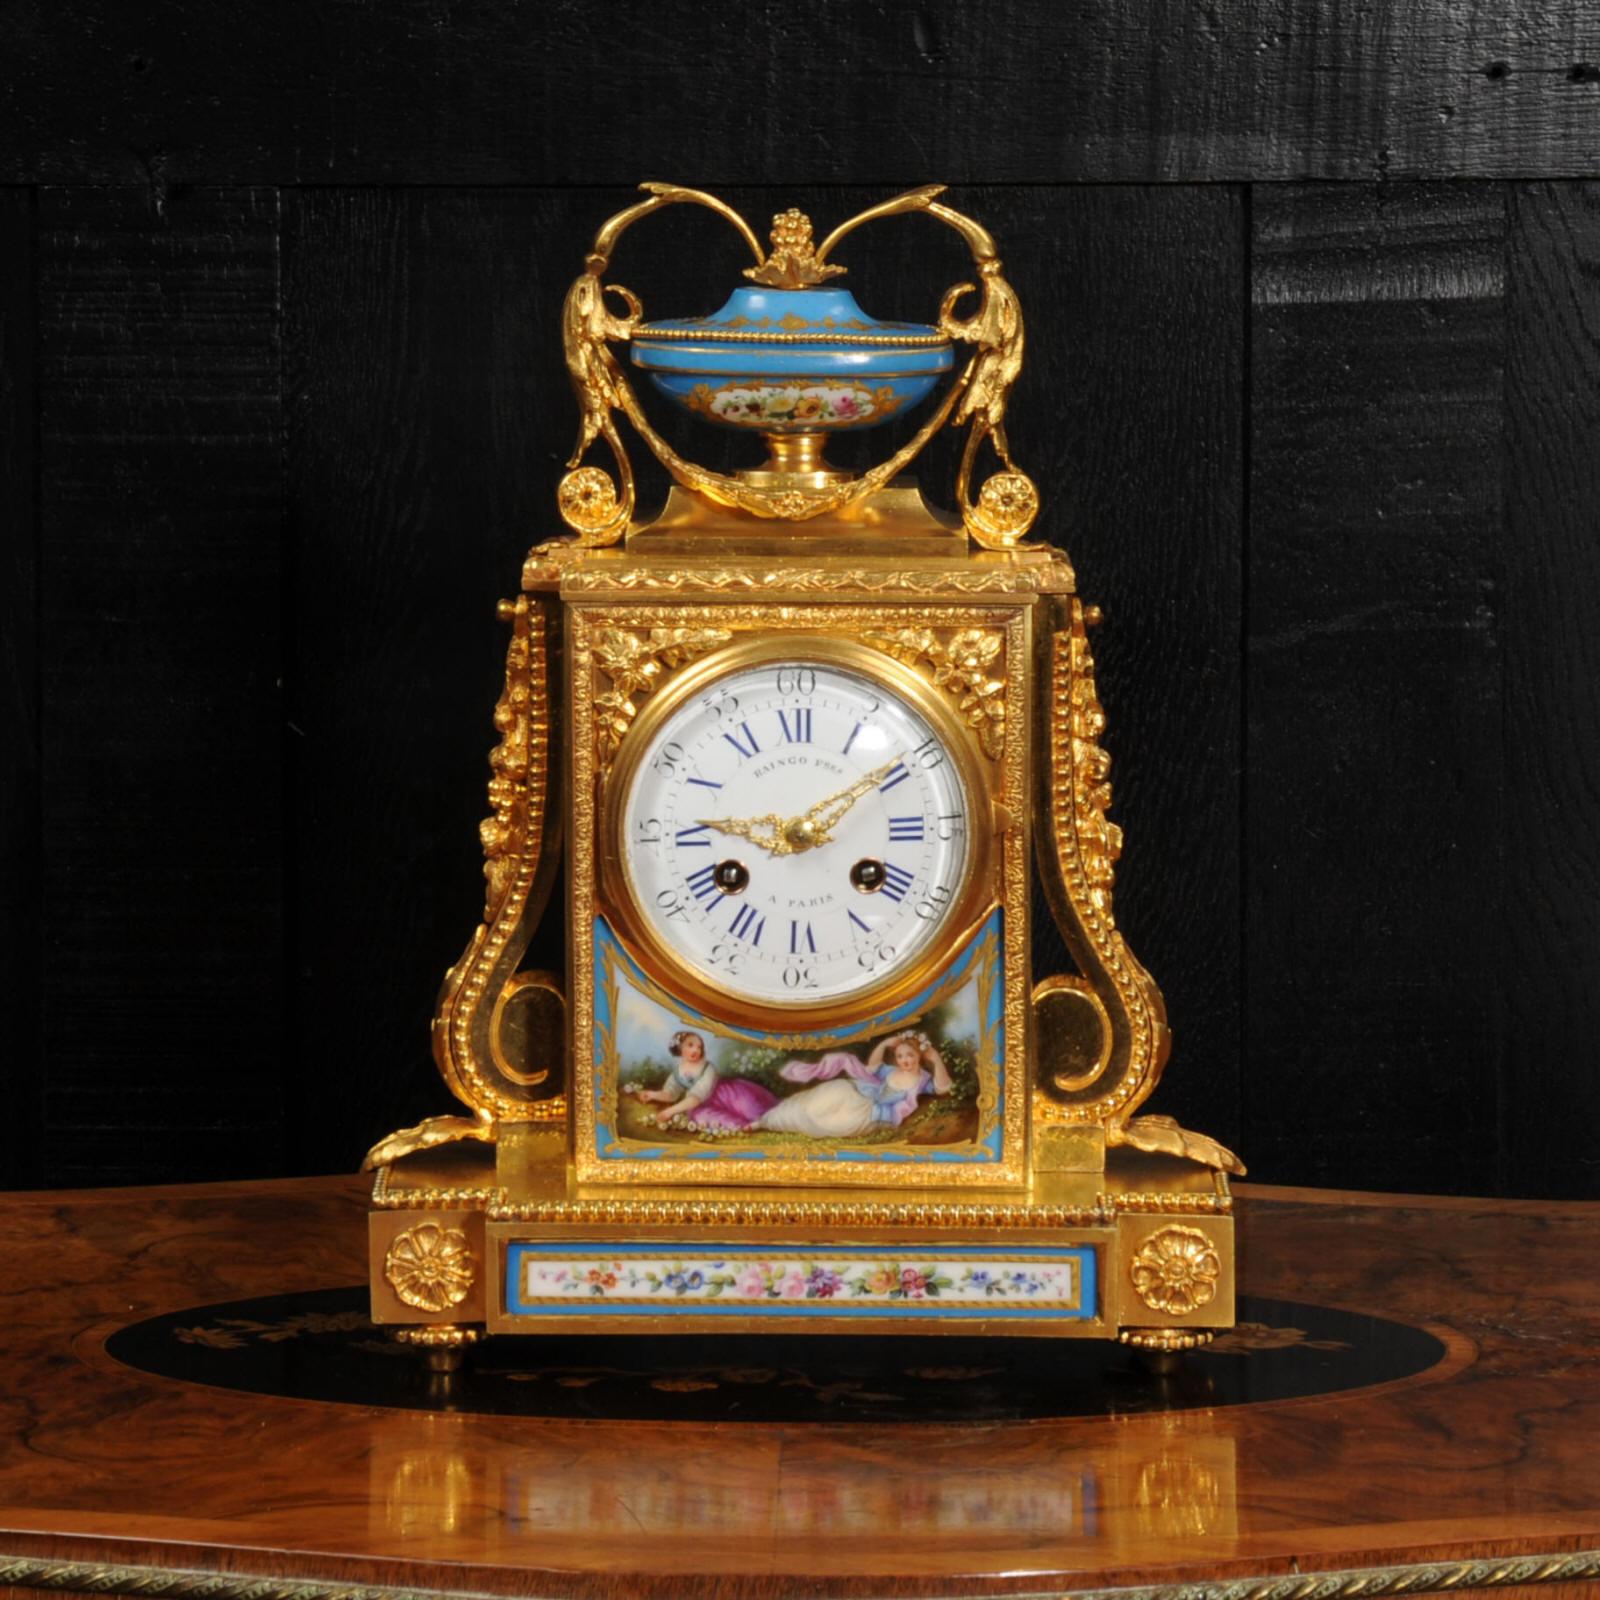 A fine and early clock, the case by Henri Picard of Paris and the movement by Raingo Frères. It is made of exquisite ormolu (finely gilded bronze) mounted with delicately painted Sèvres style porcelain with a blue ground. The panel below the dial is